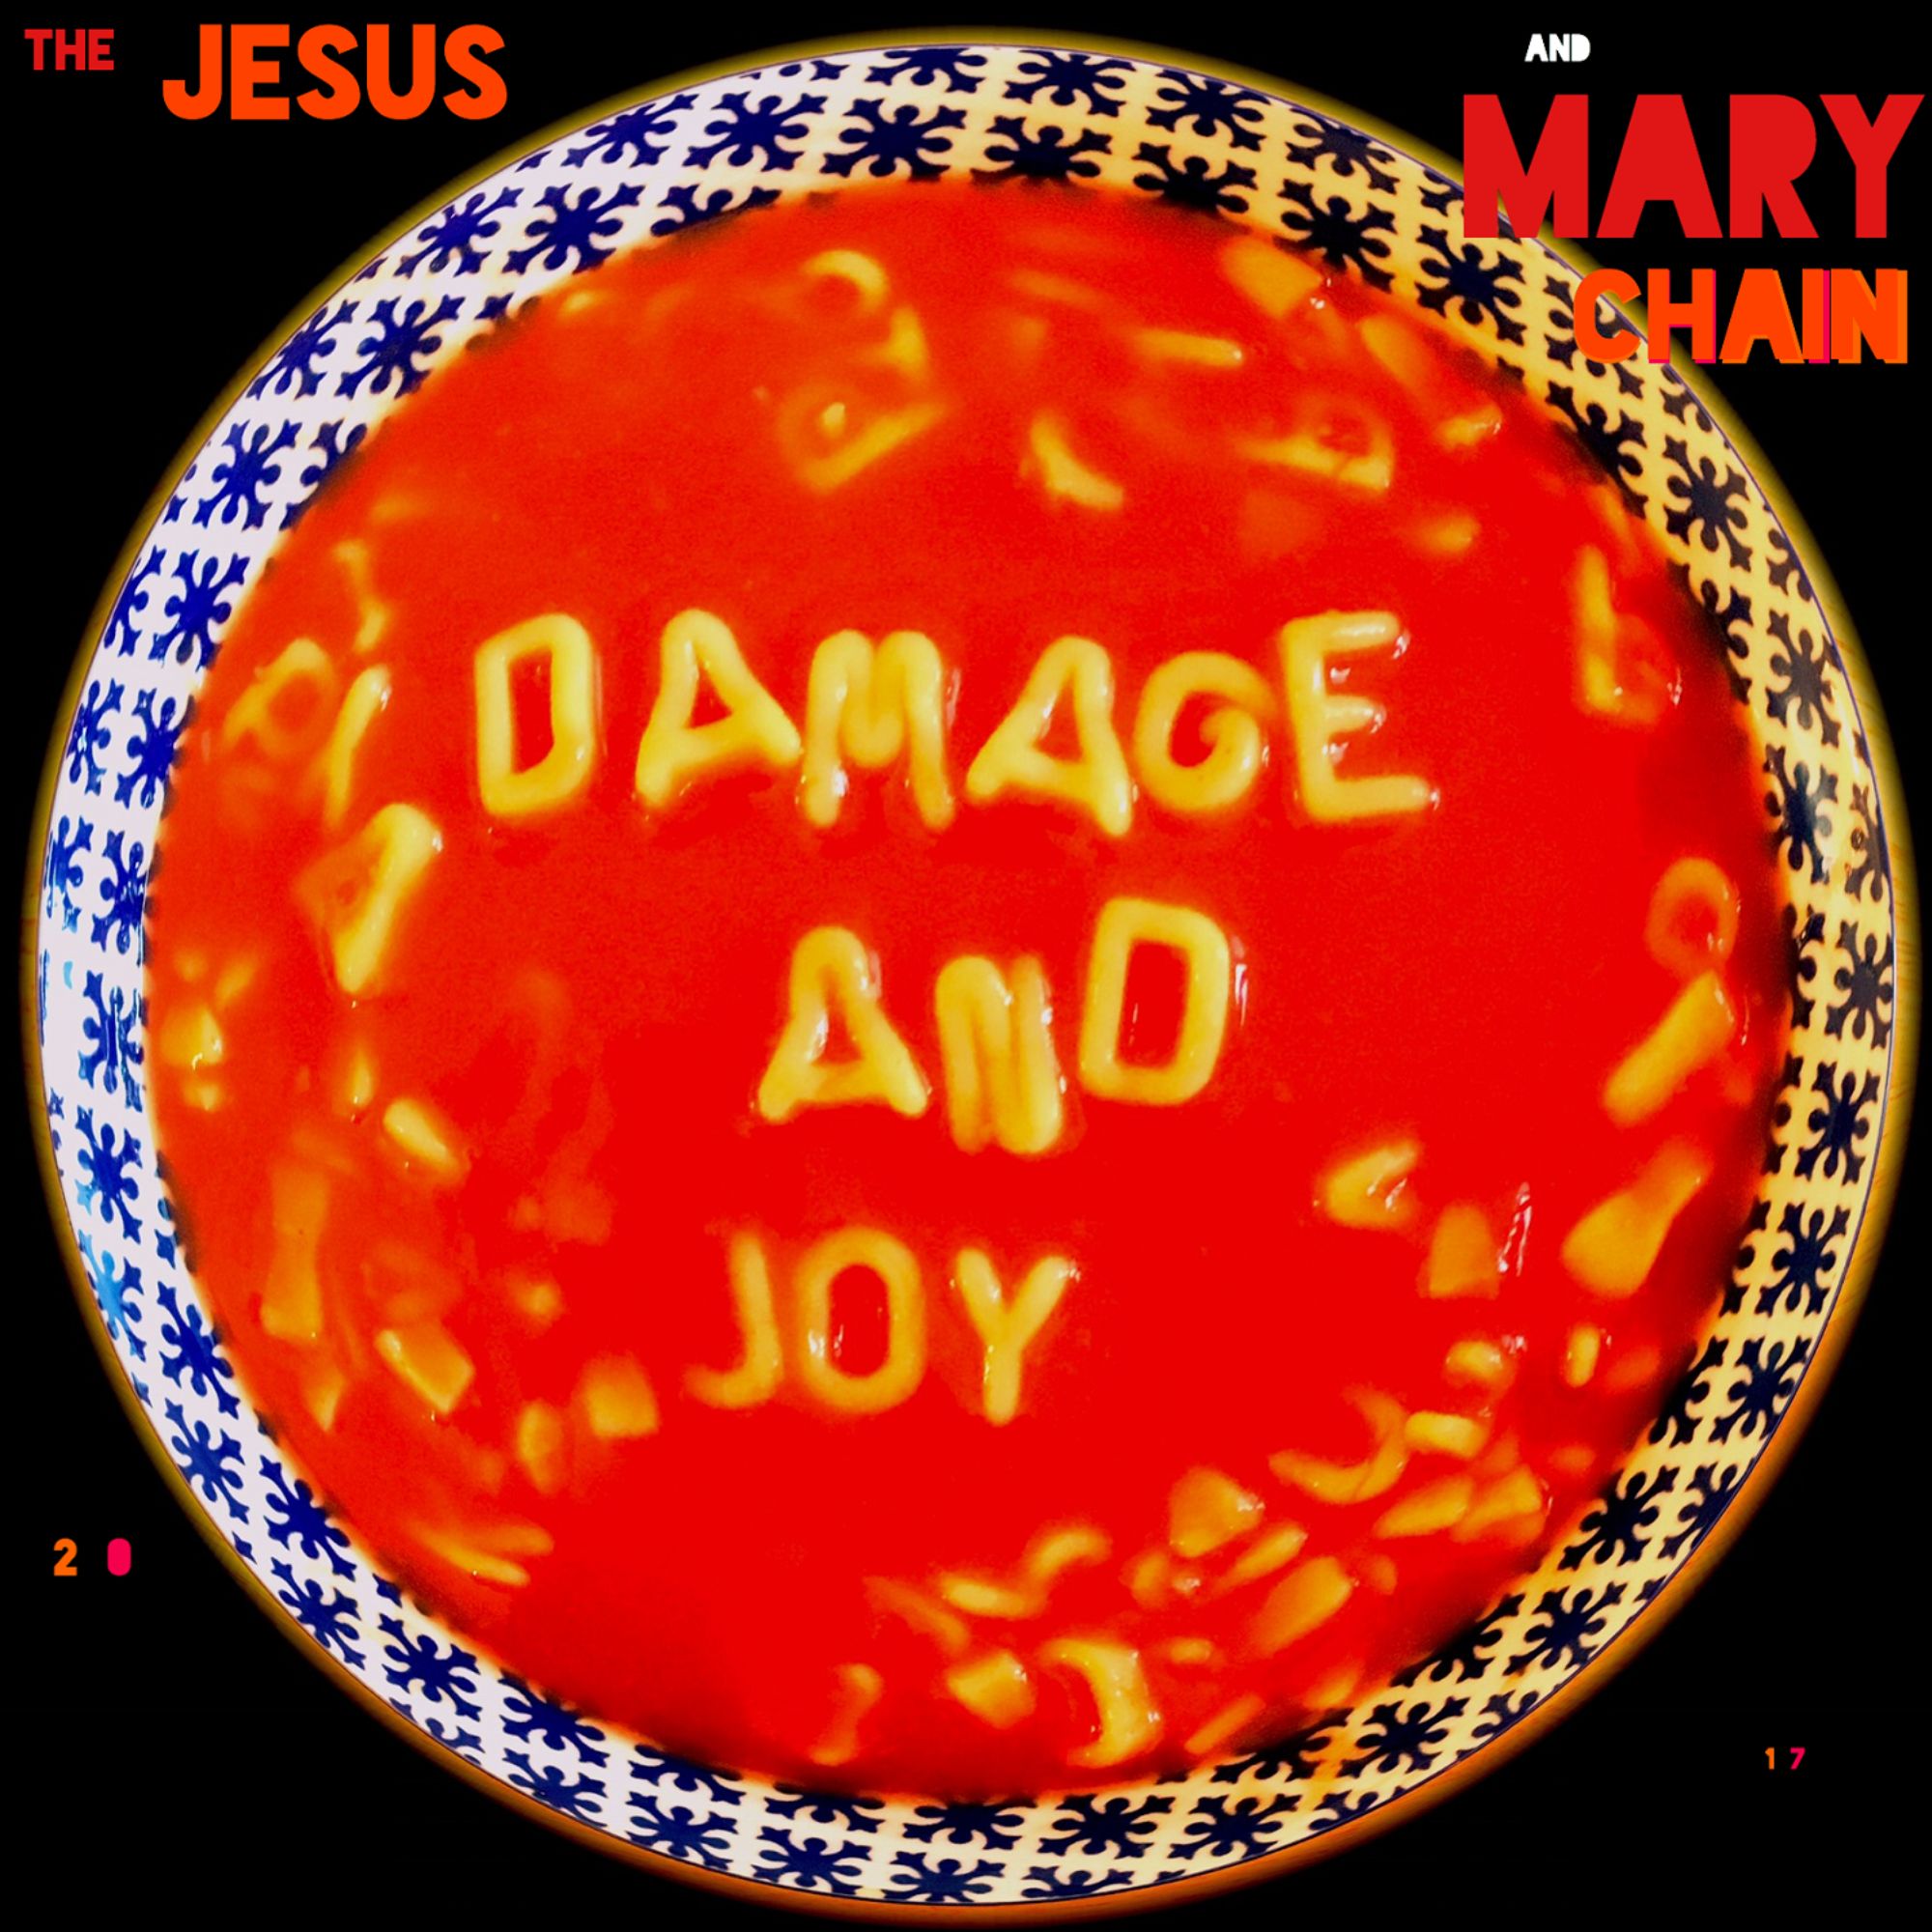 The Jesus And Mary Chain - Damage And Joy (2017) [HDTracks FLAC 24bit/44,1kHz]